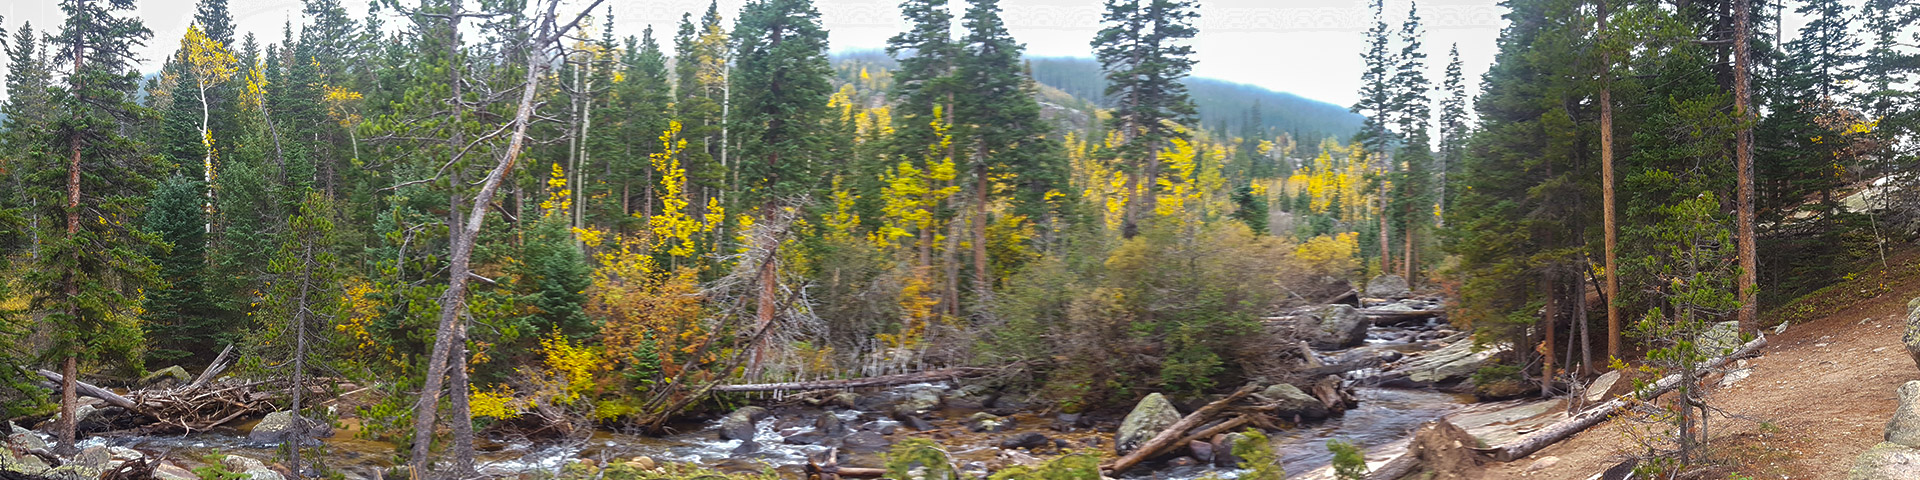 Panorama from the Ouzel Falls hike in Rocky Mountain National Park, Colorado